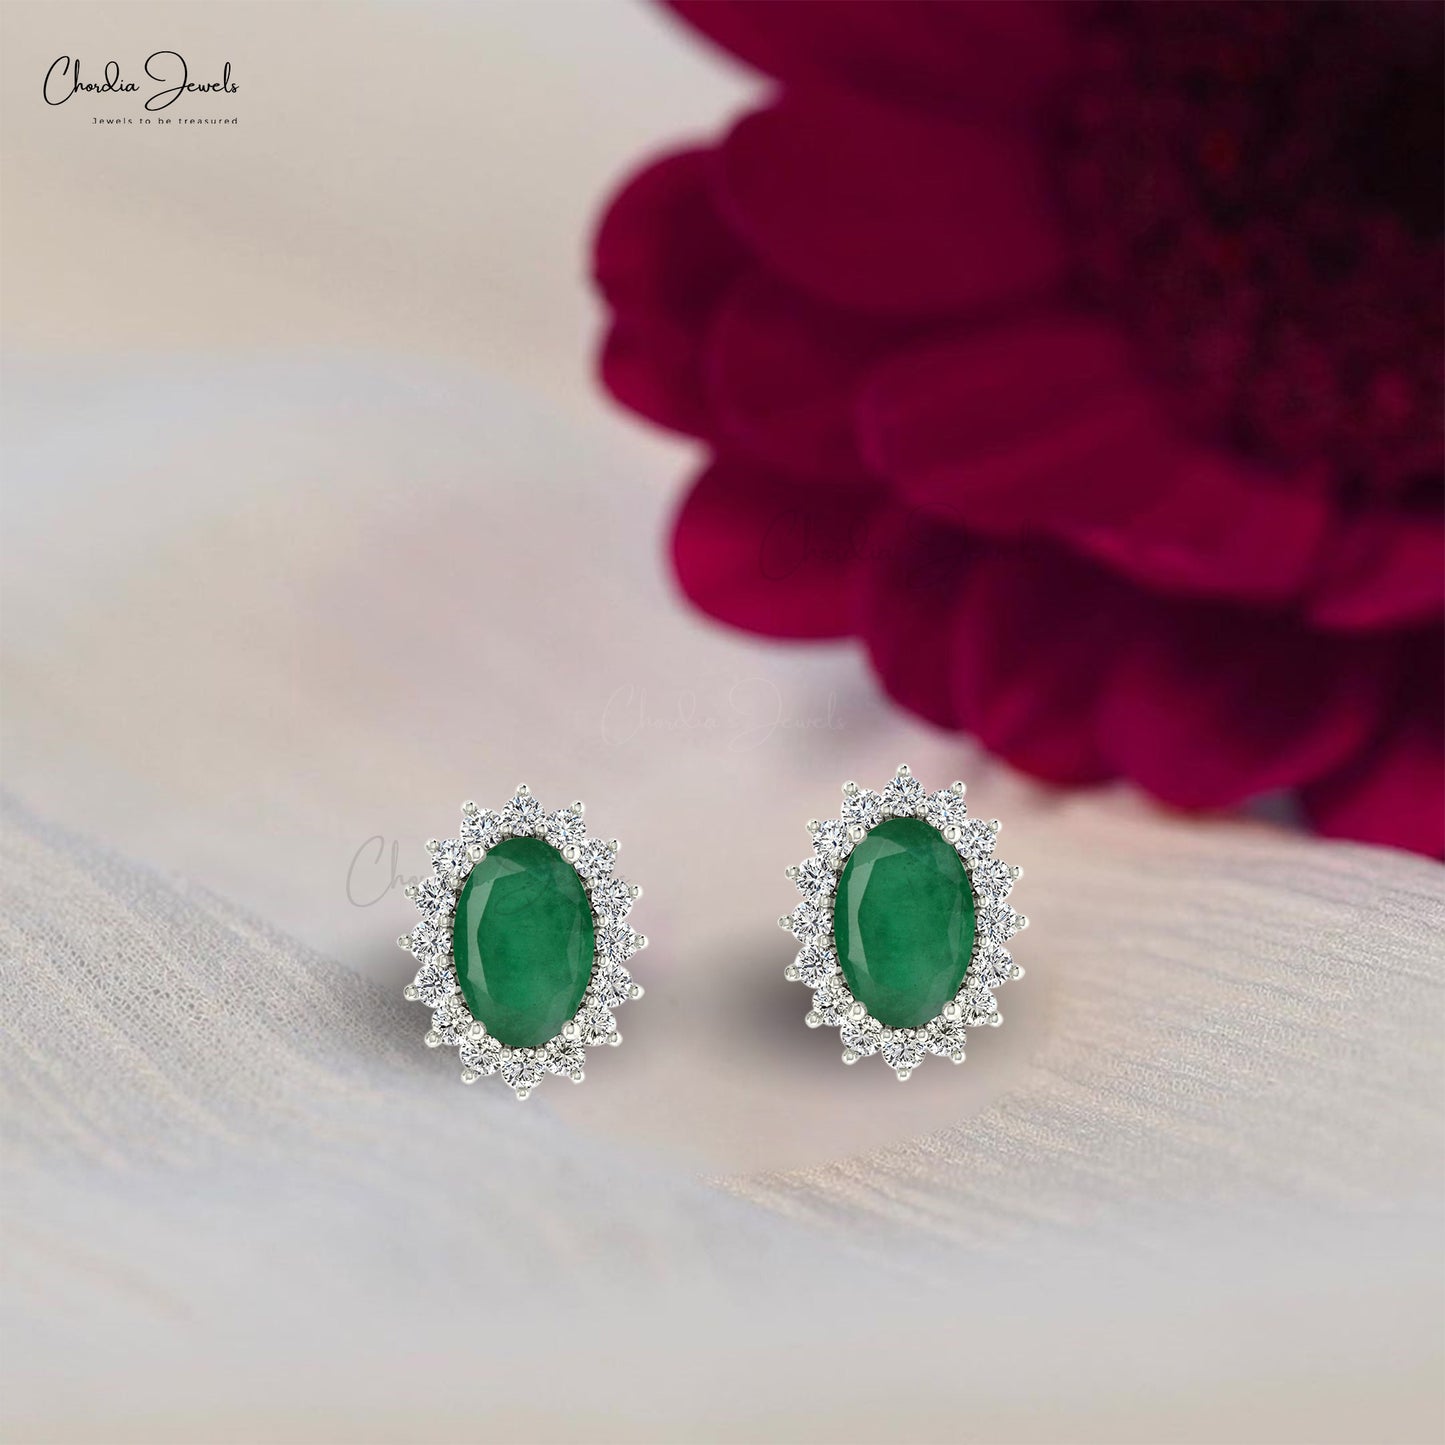 Green Emerald Halo Earrings 14k Real Gold Dainty Diamond Classic Earrings 6x4mm Natural Oval Cut Gemstone Grace Jewelry For Her